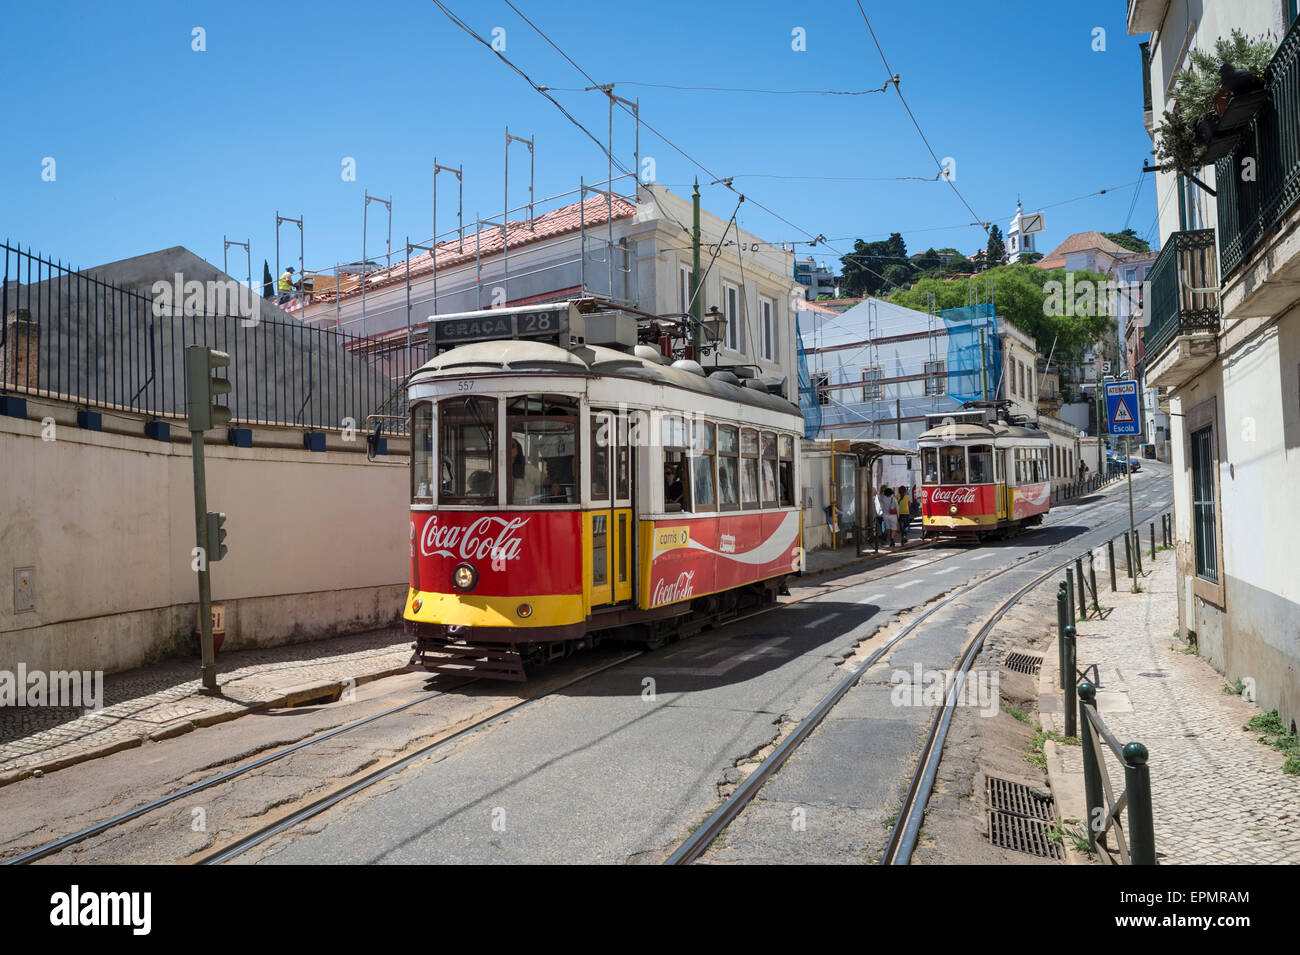 the number 28 tram in Lisbon Portugal Stock Photo